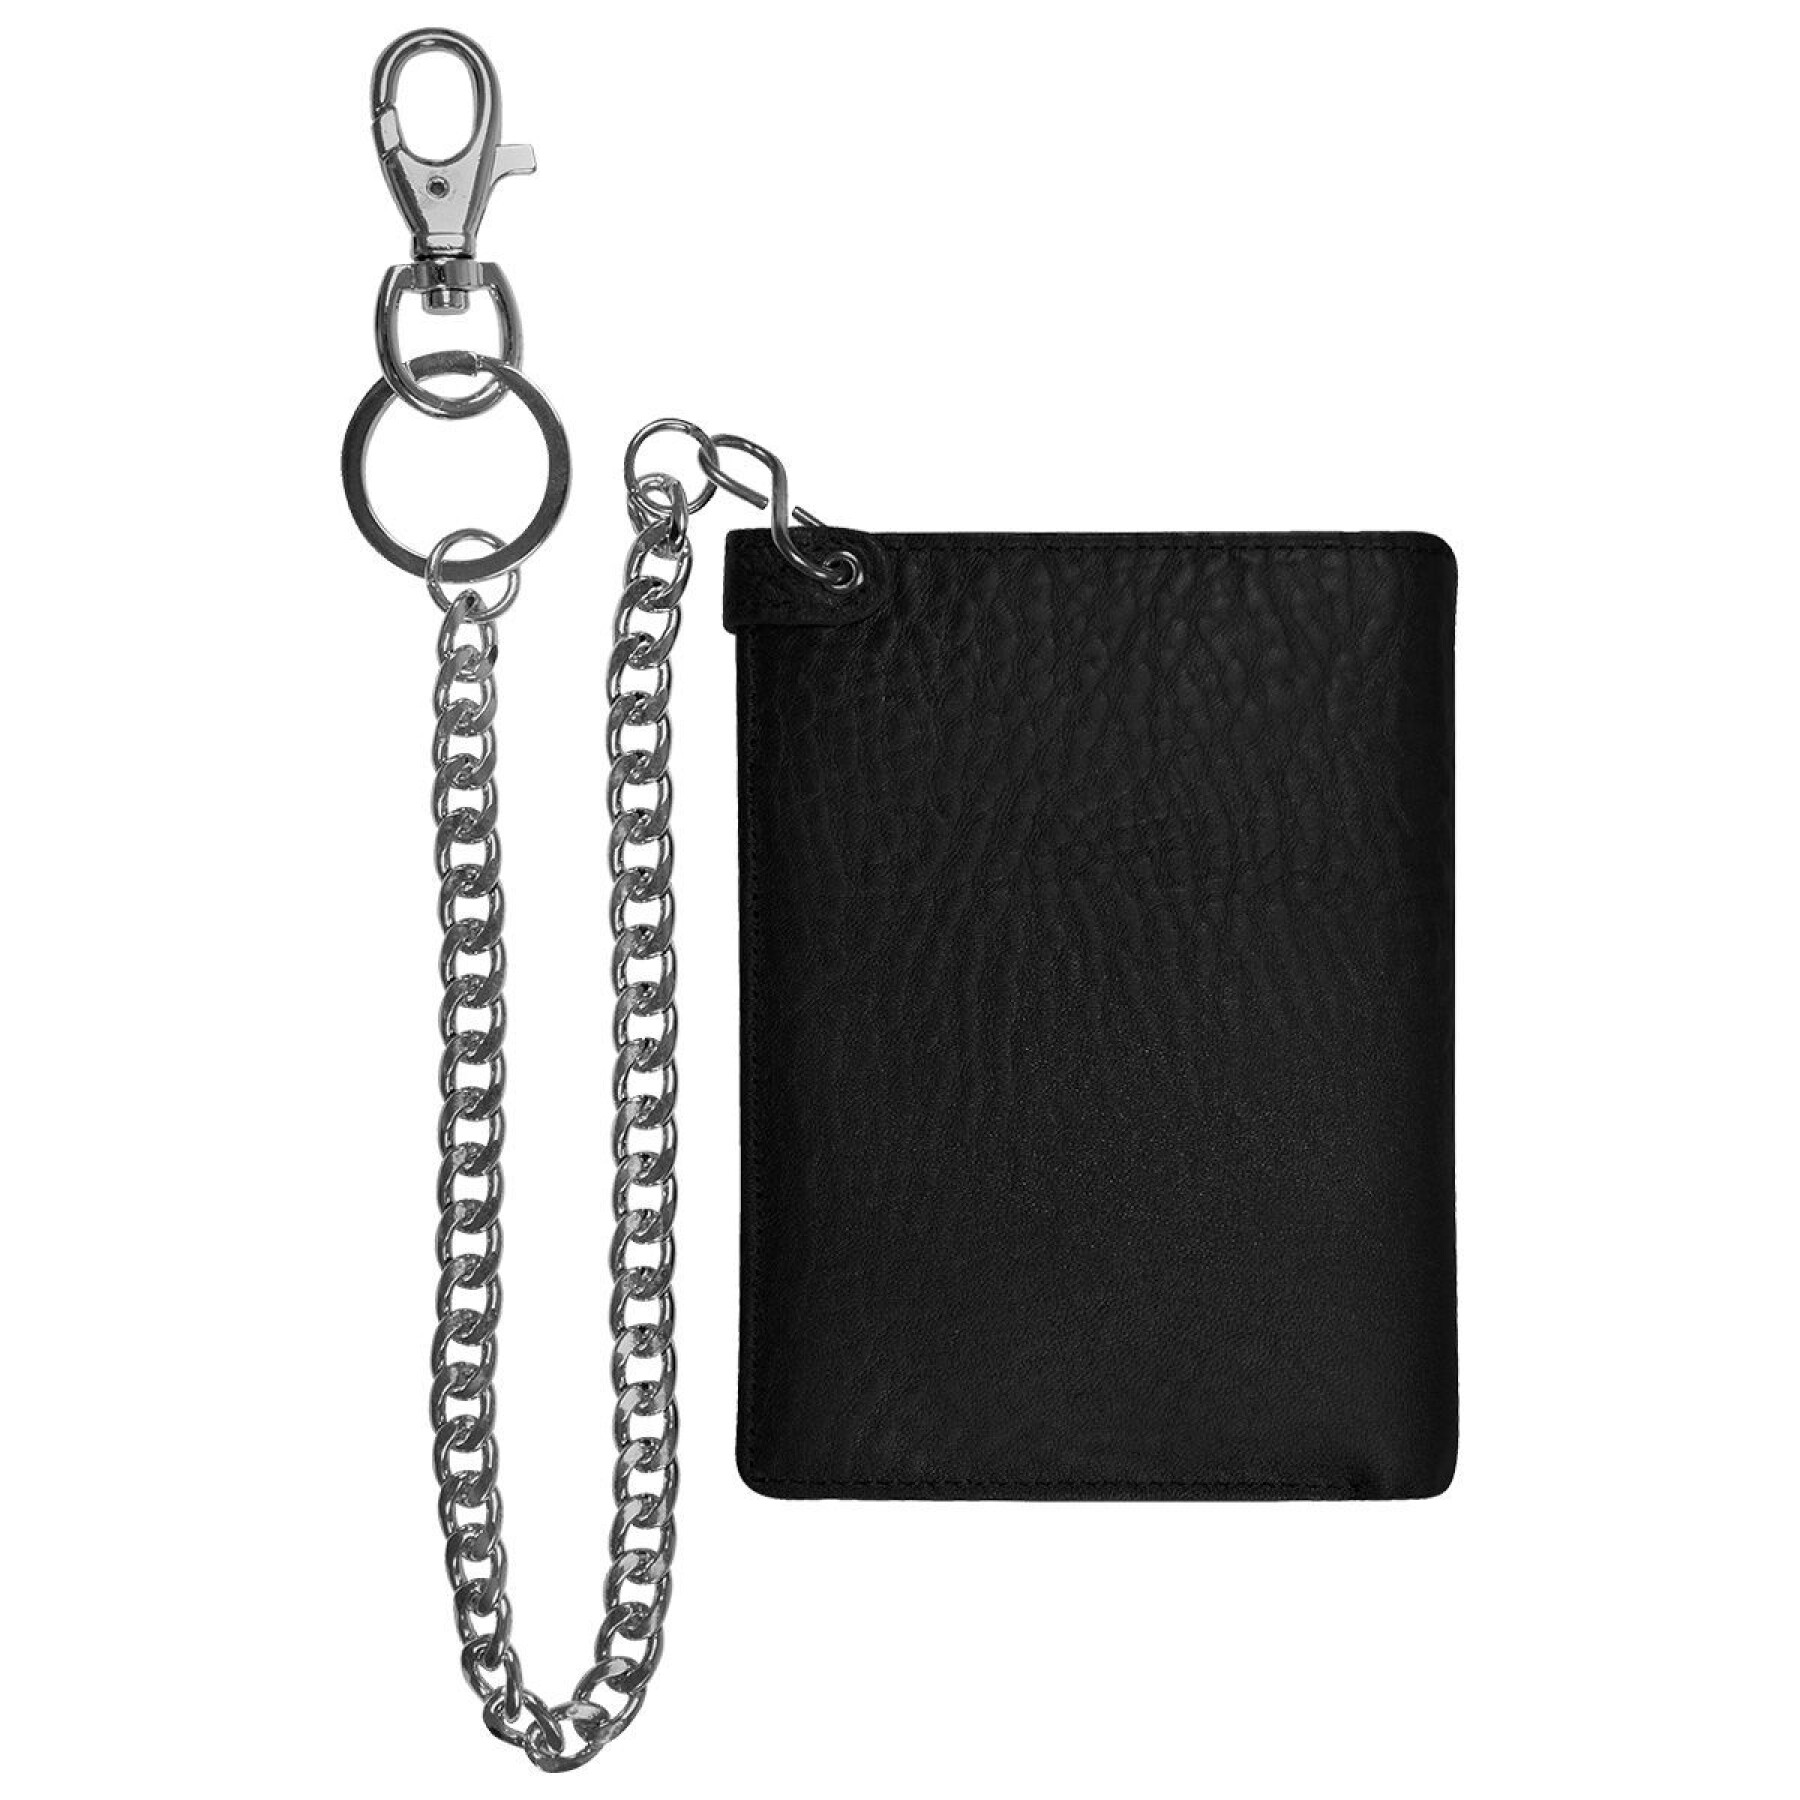 Leather chain wallet with skull Rock à Gogo Double Fuck